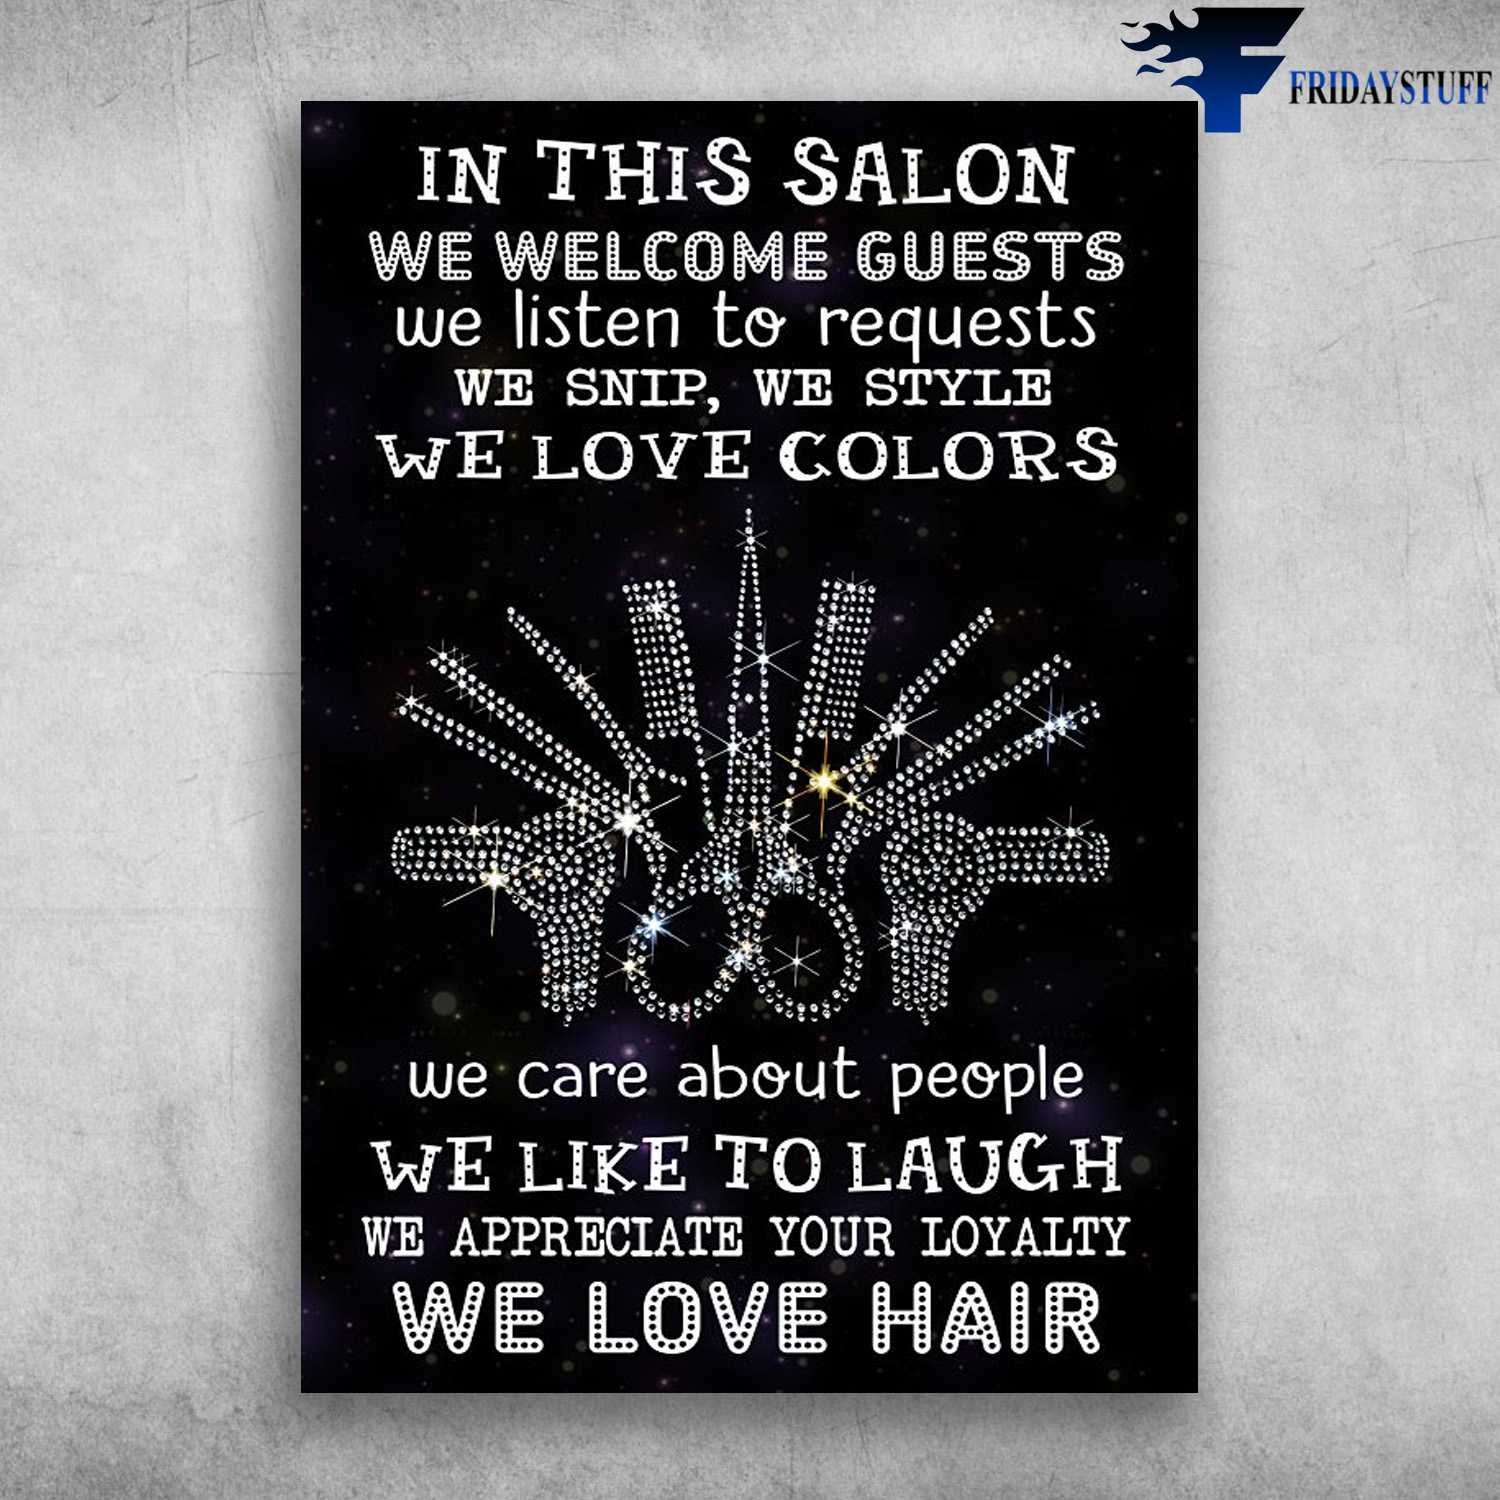 Hairdress Poster, Hair Solon, In This Salon, We Welcome Guests, We Listen To Requests, We Snip, We Style, We Love Colors